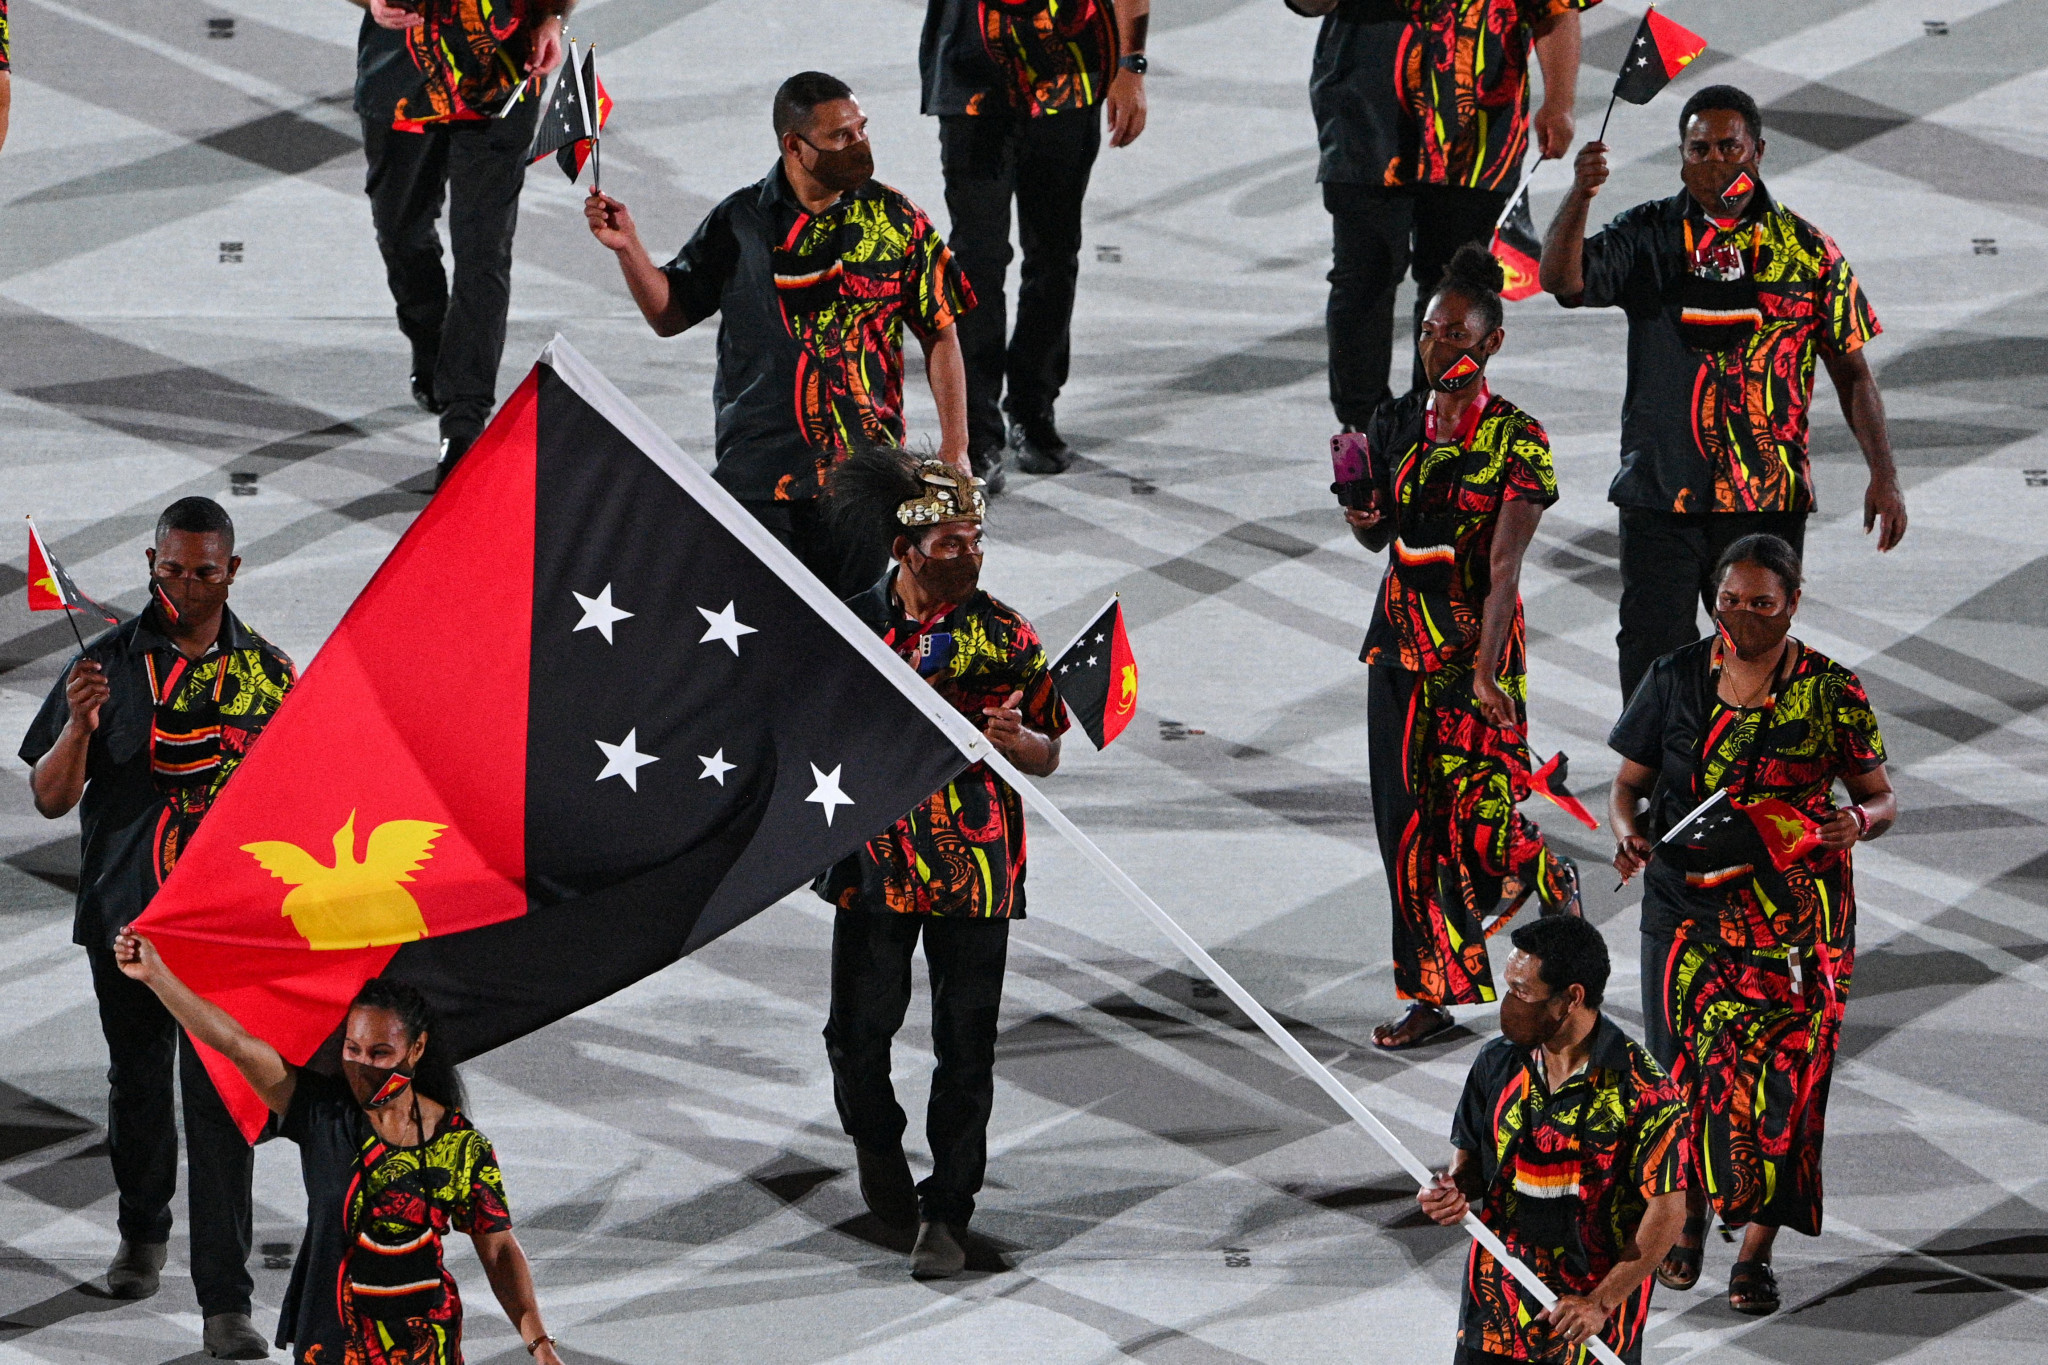 Athletes and staff involved with the Papua New Guinea team will be eligible to receive discounts on equipment and clothing under the new sponsorship deal with Trophy Haus Limited ©Getty Images